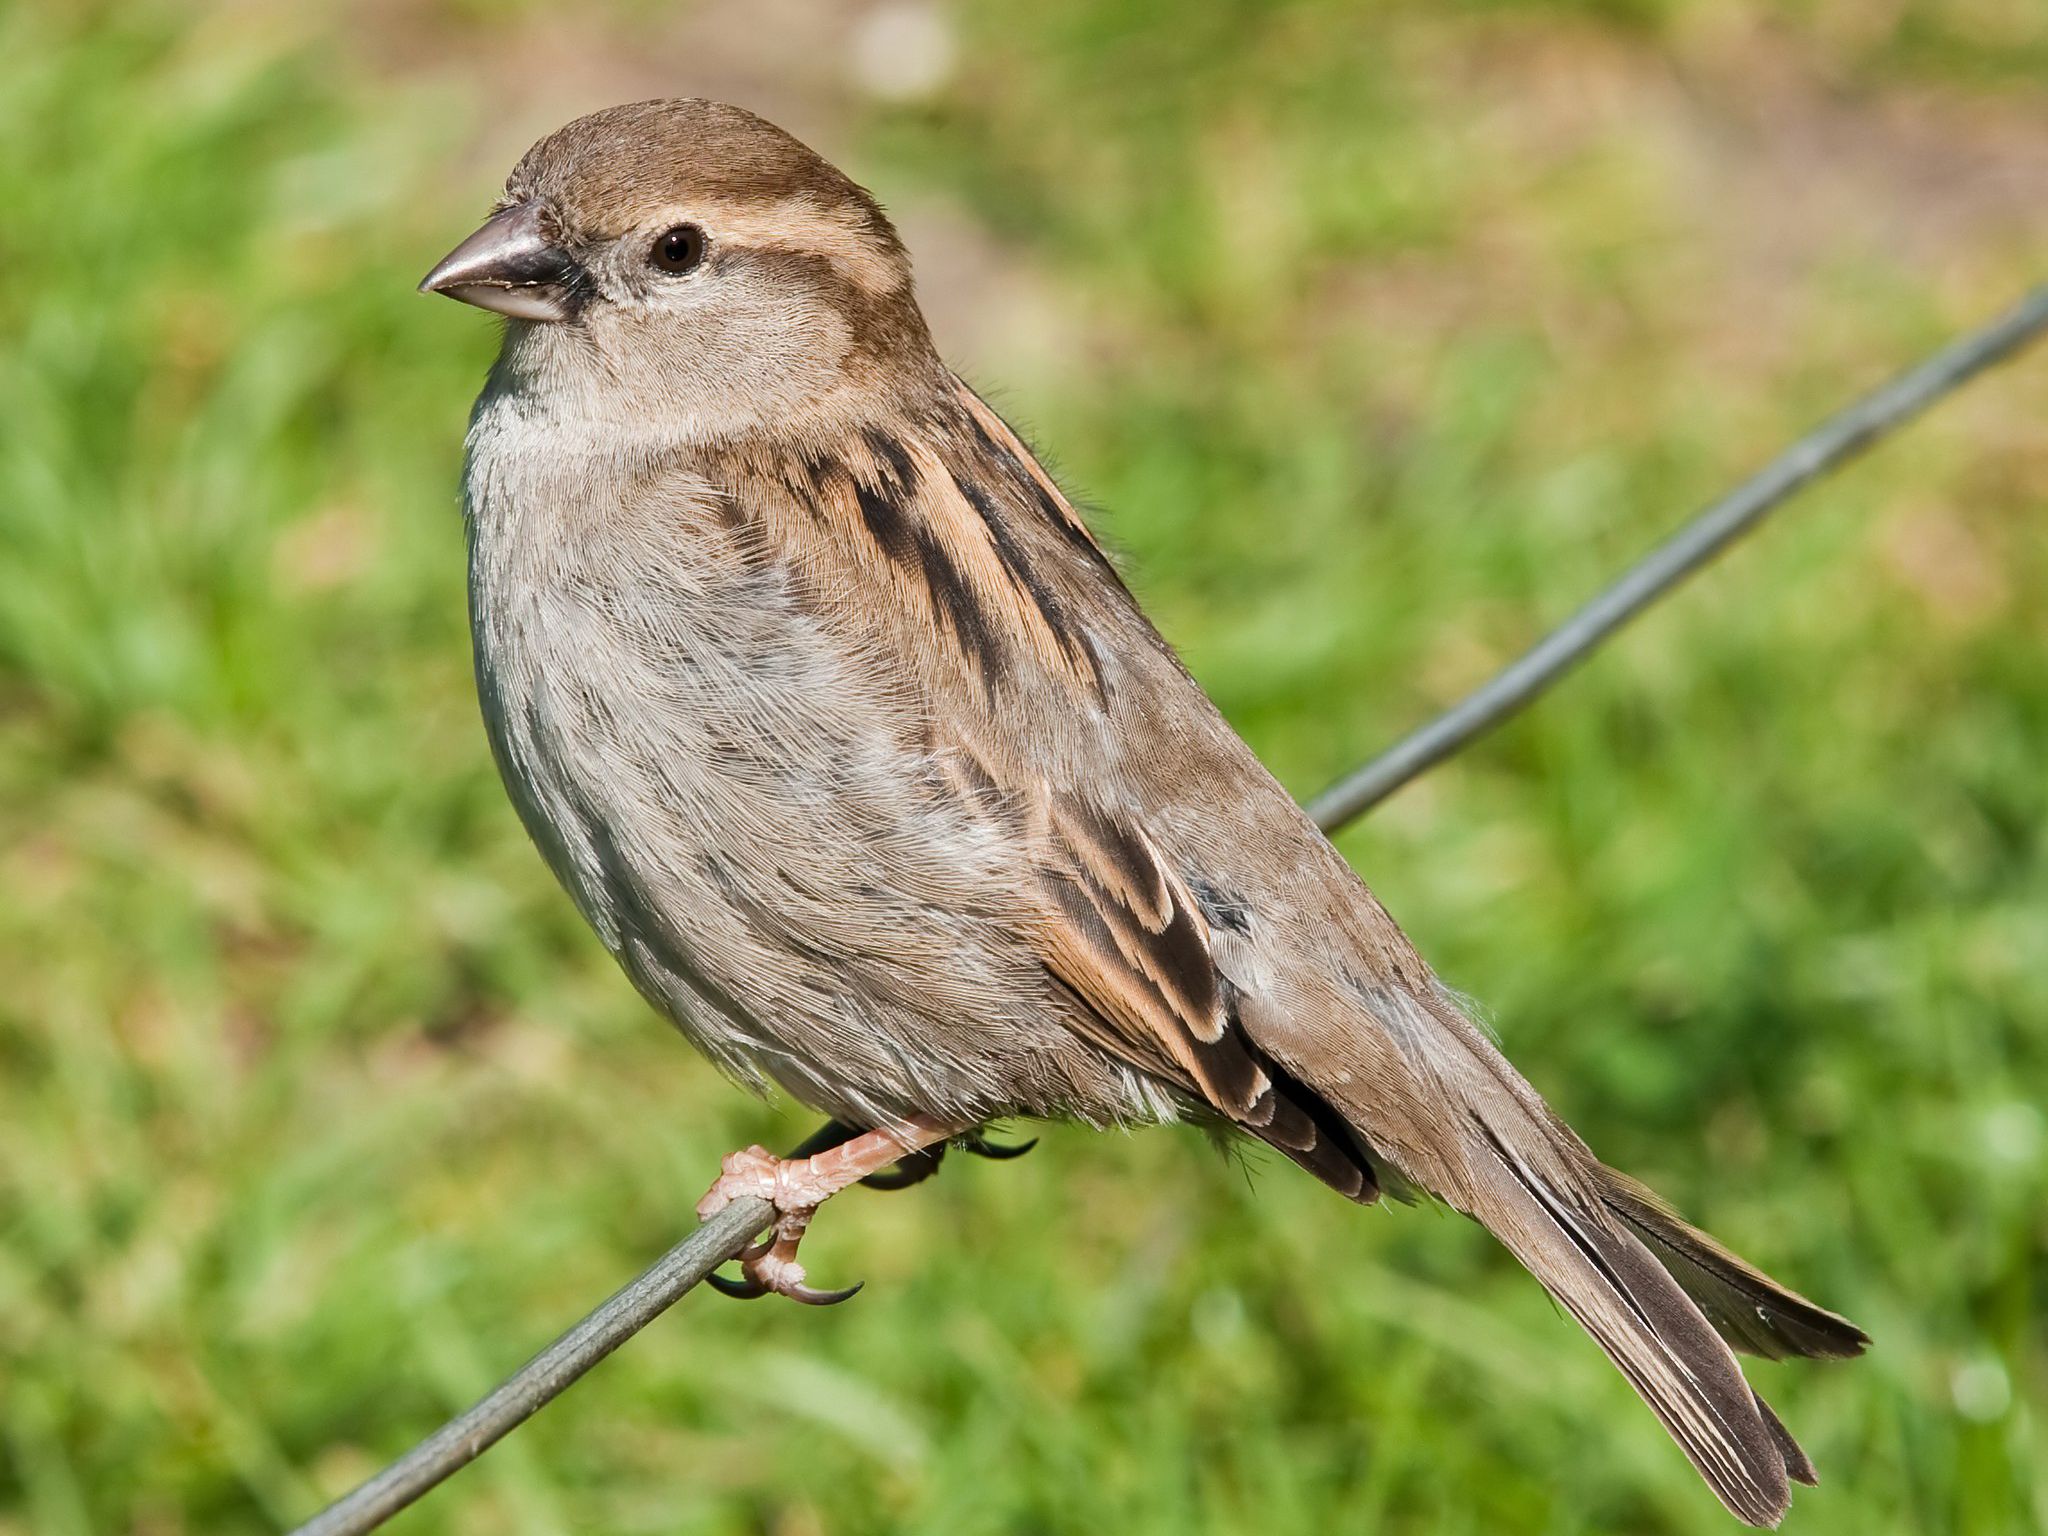 What is so special about sparrows?